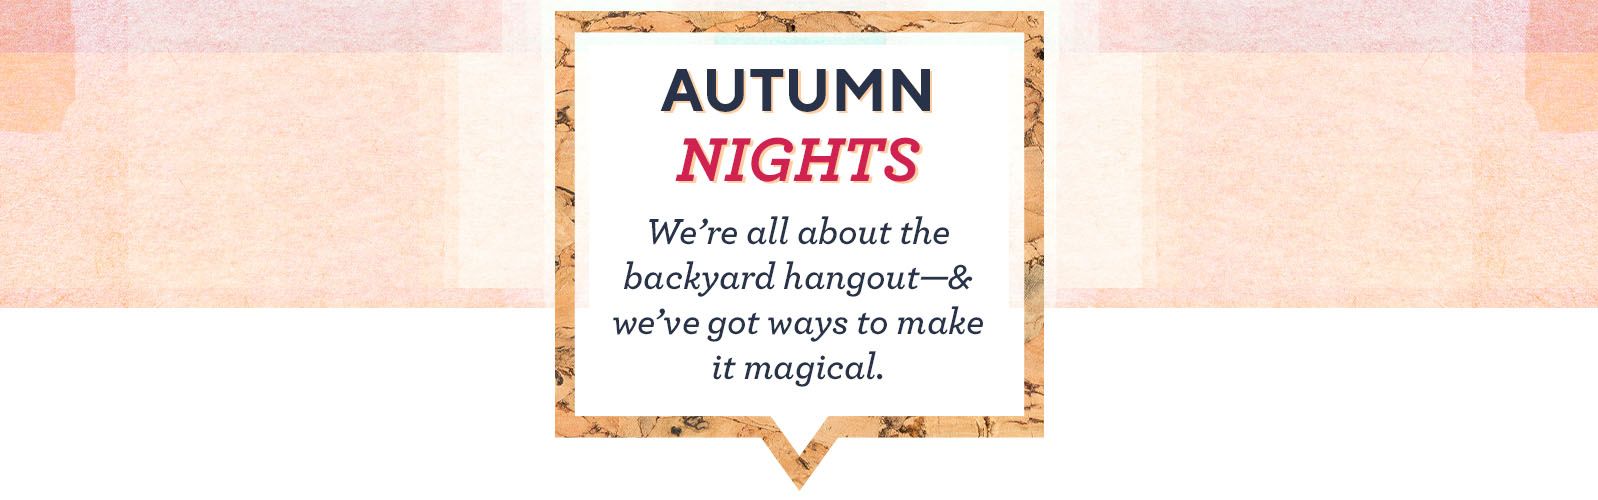 Autumn Nights  We're all about the backyard hangout—& we've got ways to make it magical.  